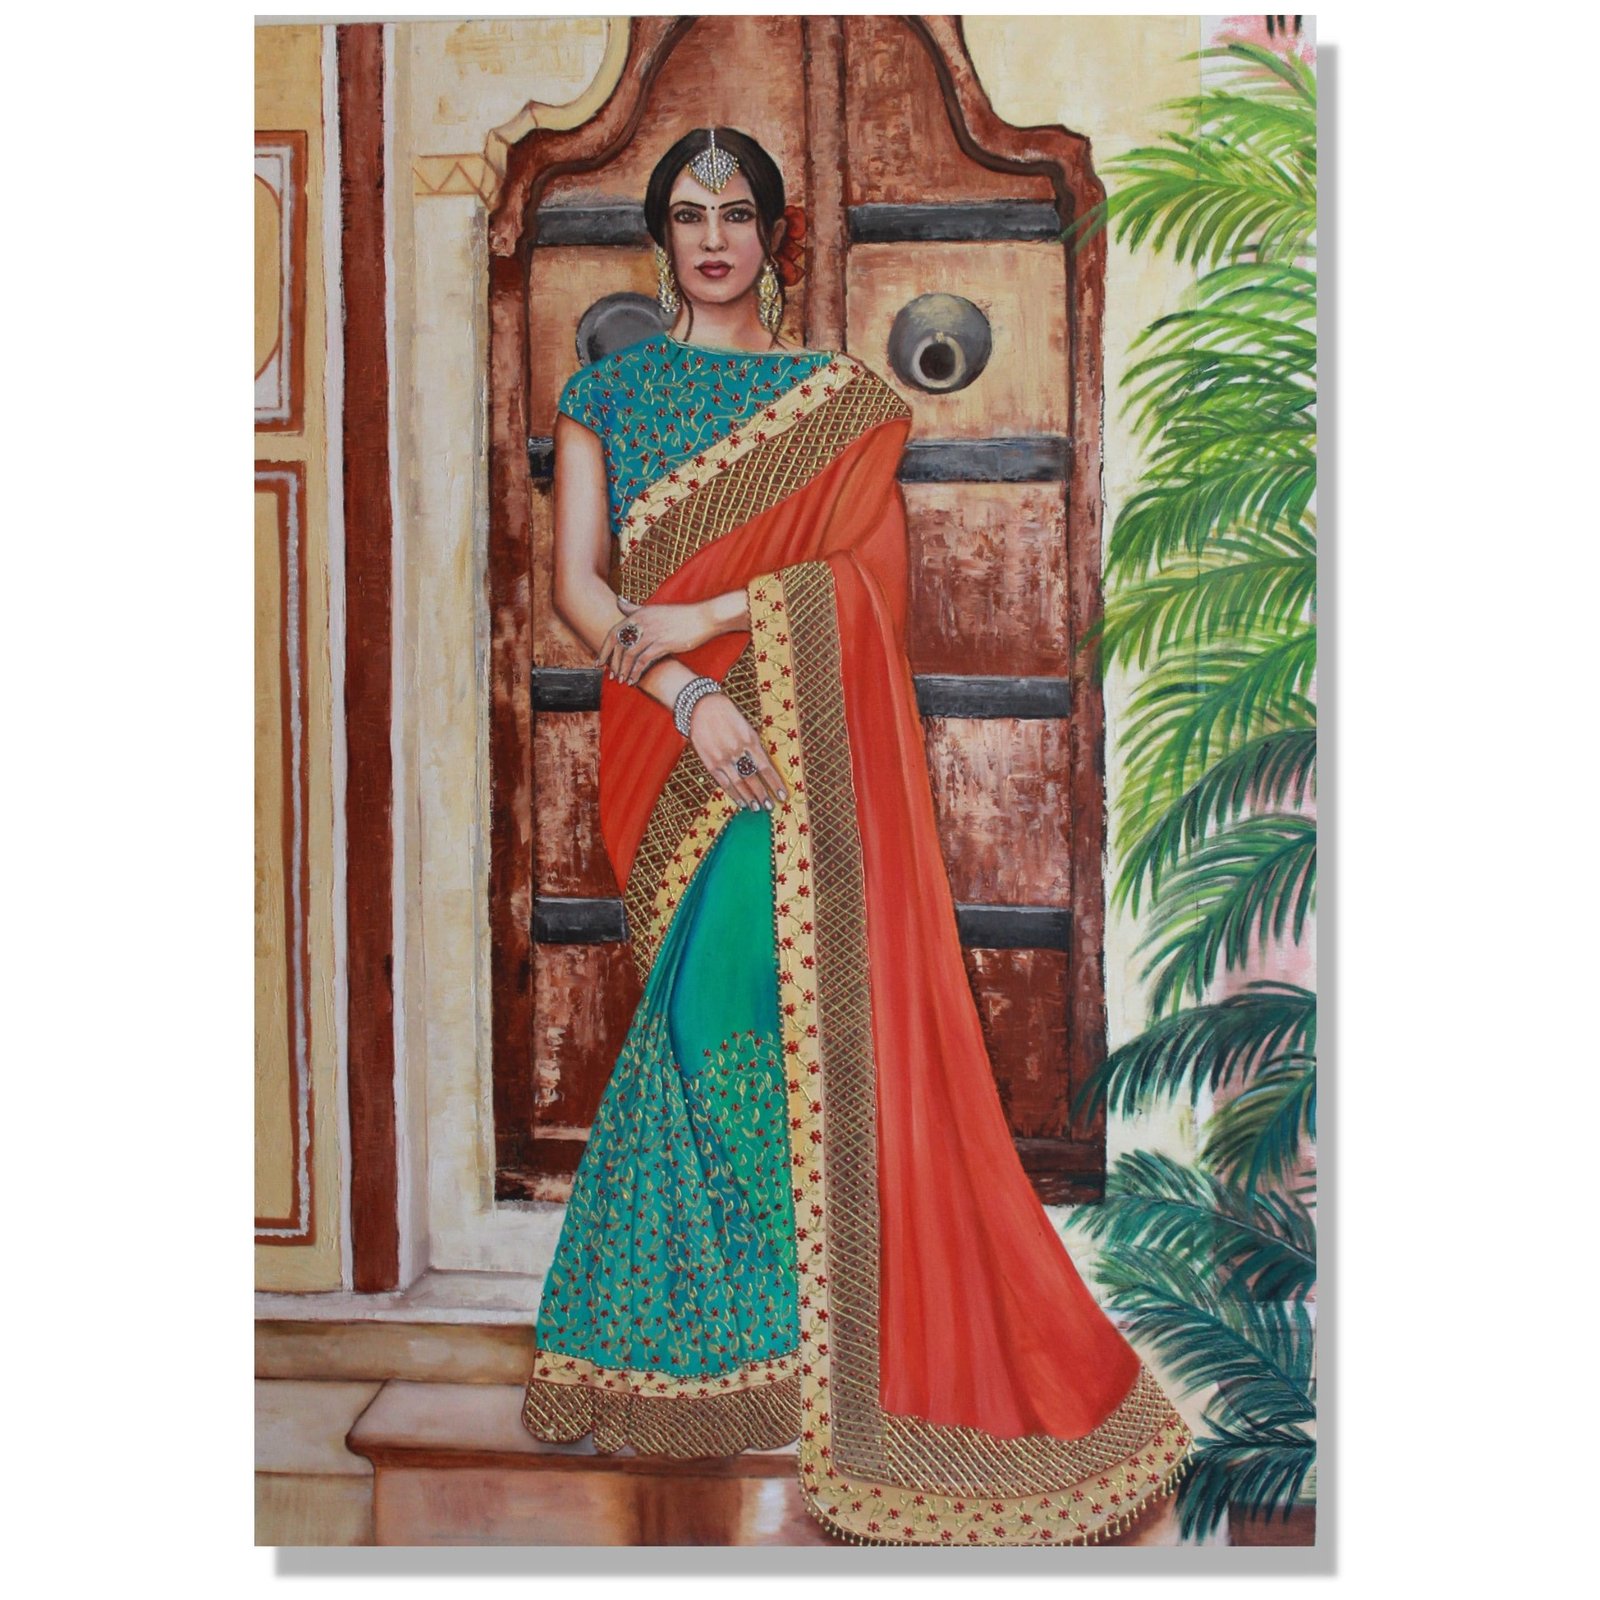 oil painting of an Indian girl wearing a traditional sari. standing in front of a door